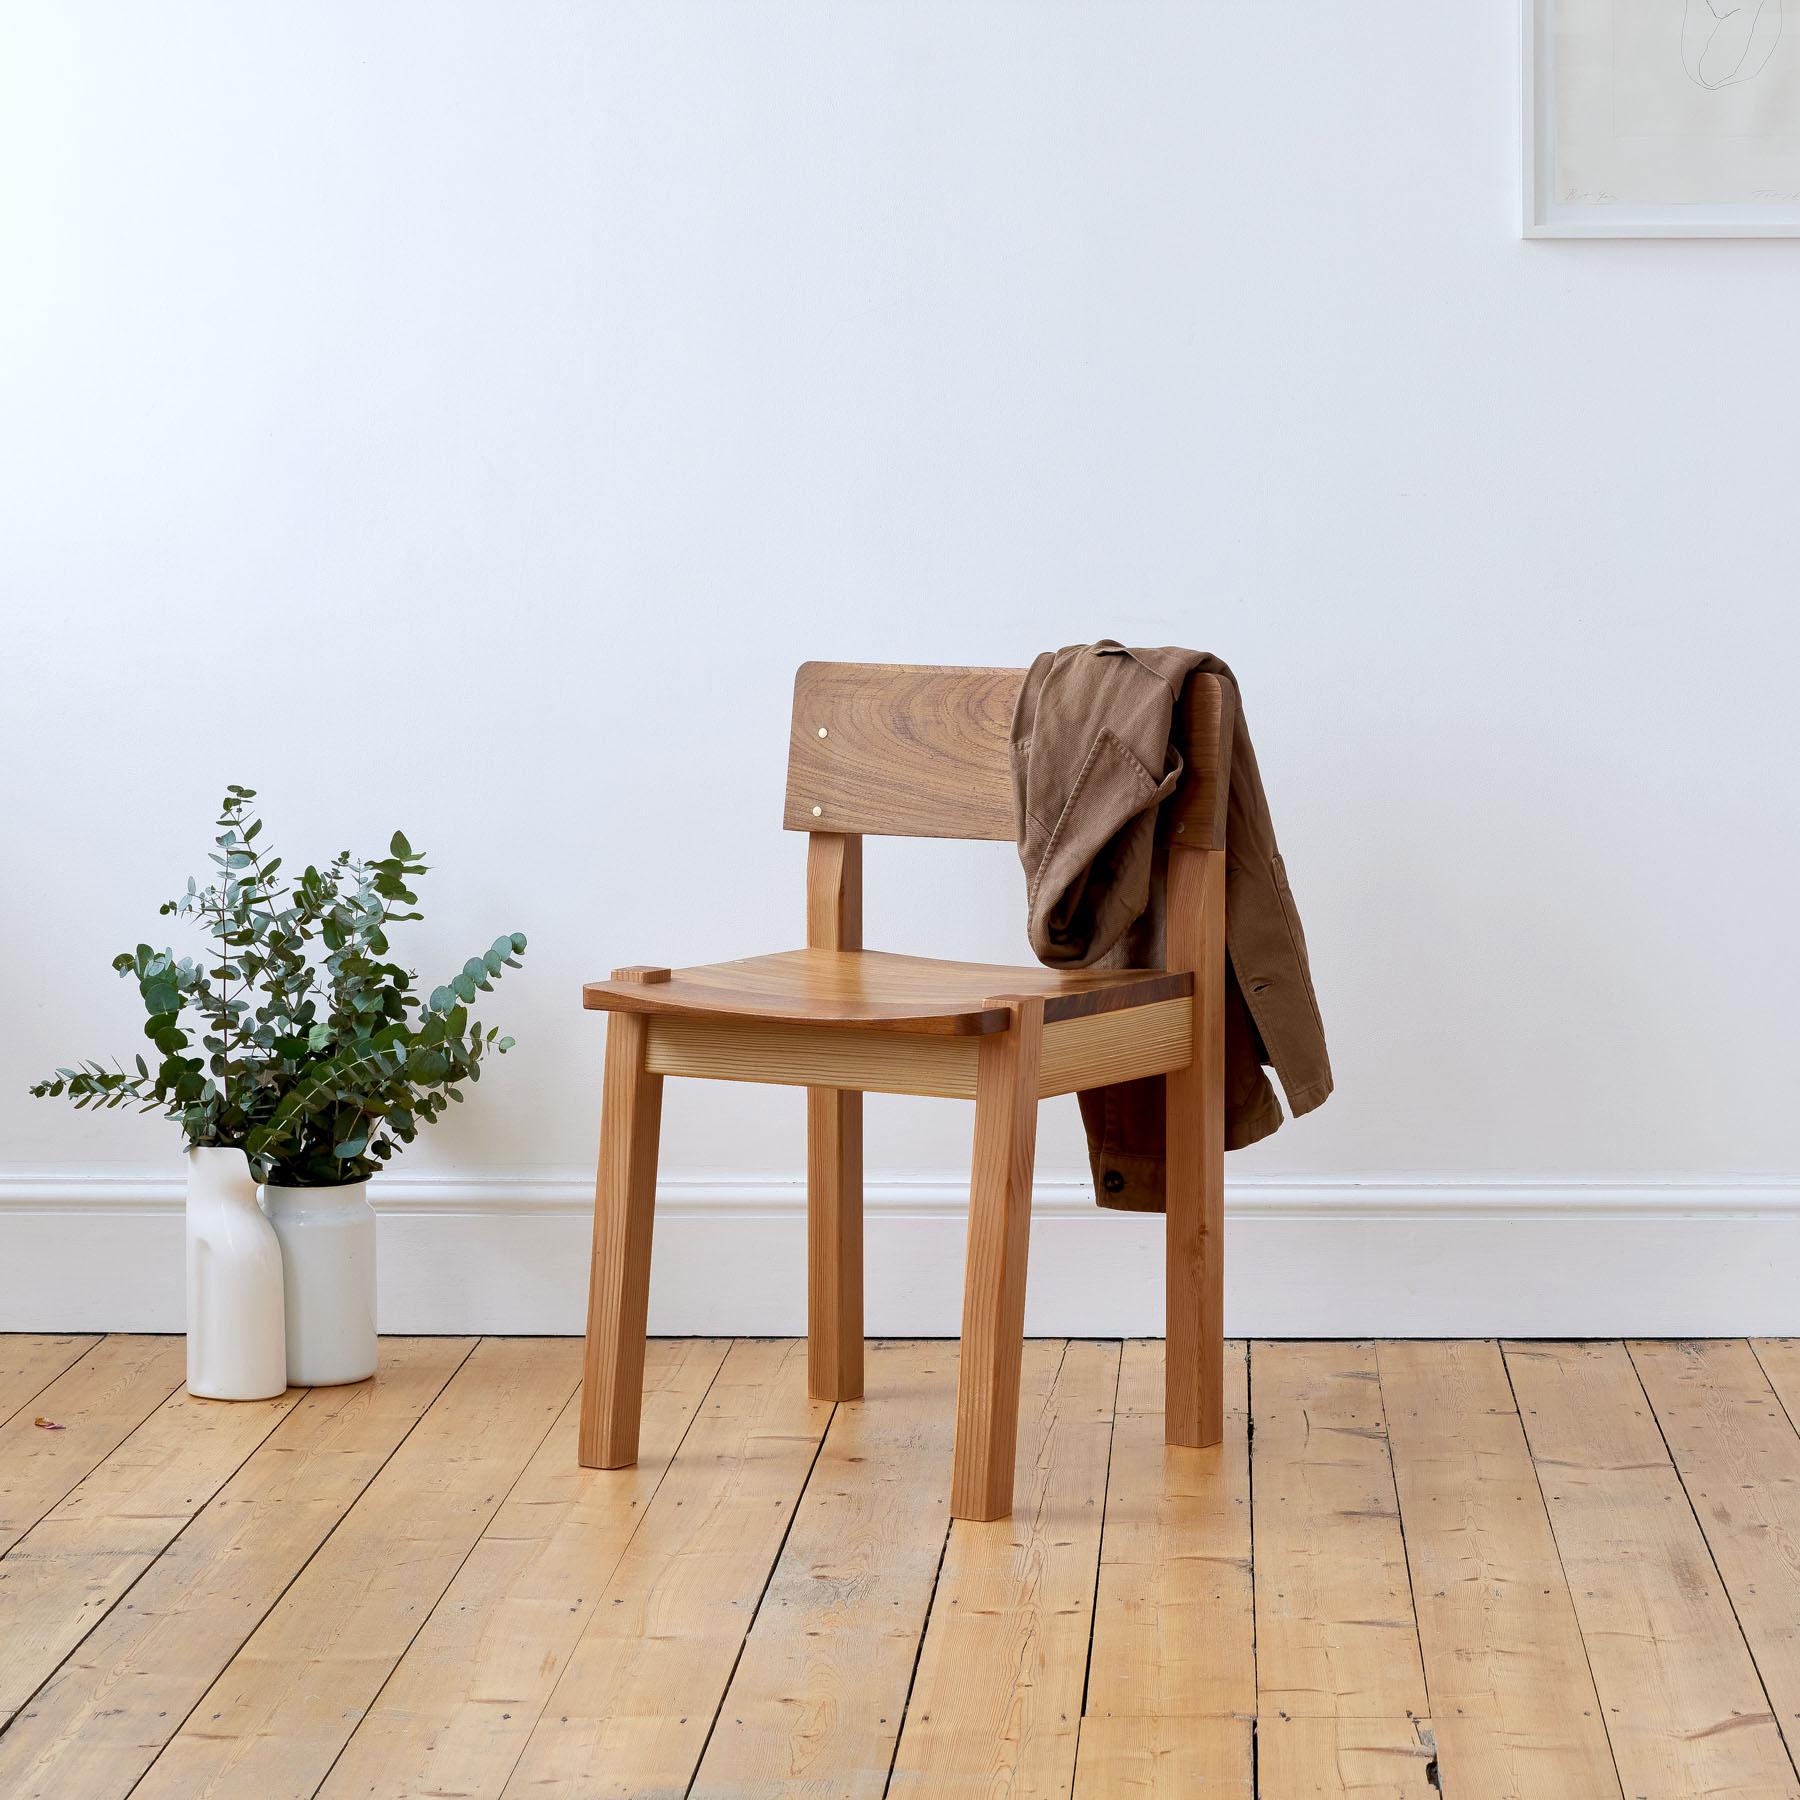 Equally fit for a study or bedroom, the Ayrton chair is full of understated charm and confident simplicity.

A modern statement in any home, its minimal design marries two contrasting yet complementary wood types - rich elm and warm beech - and